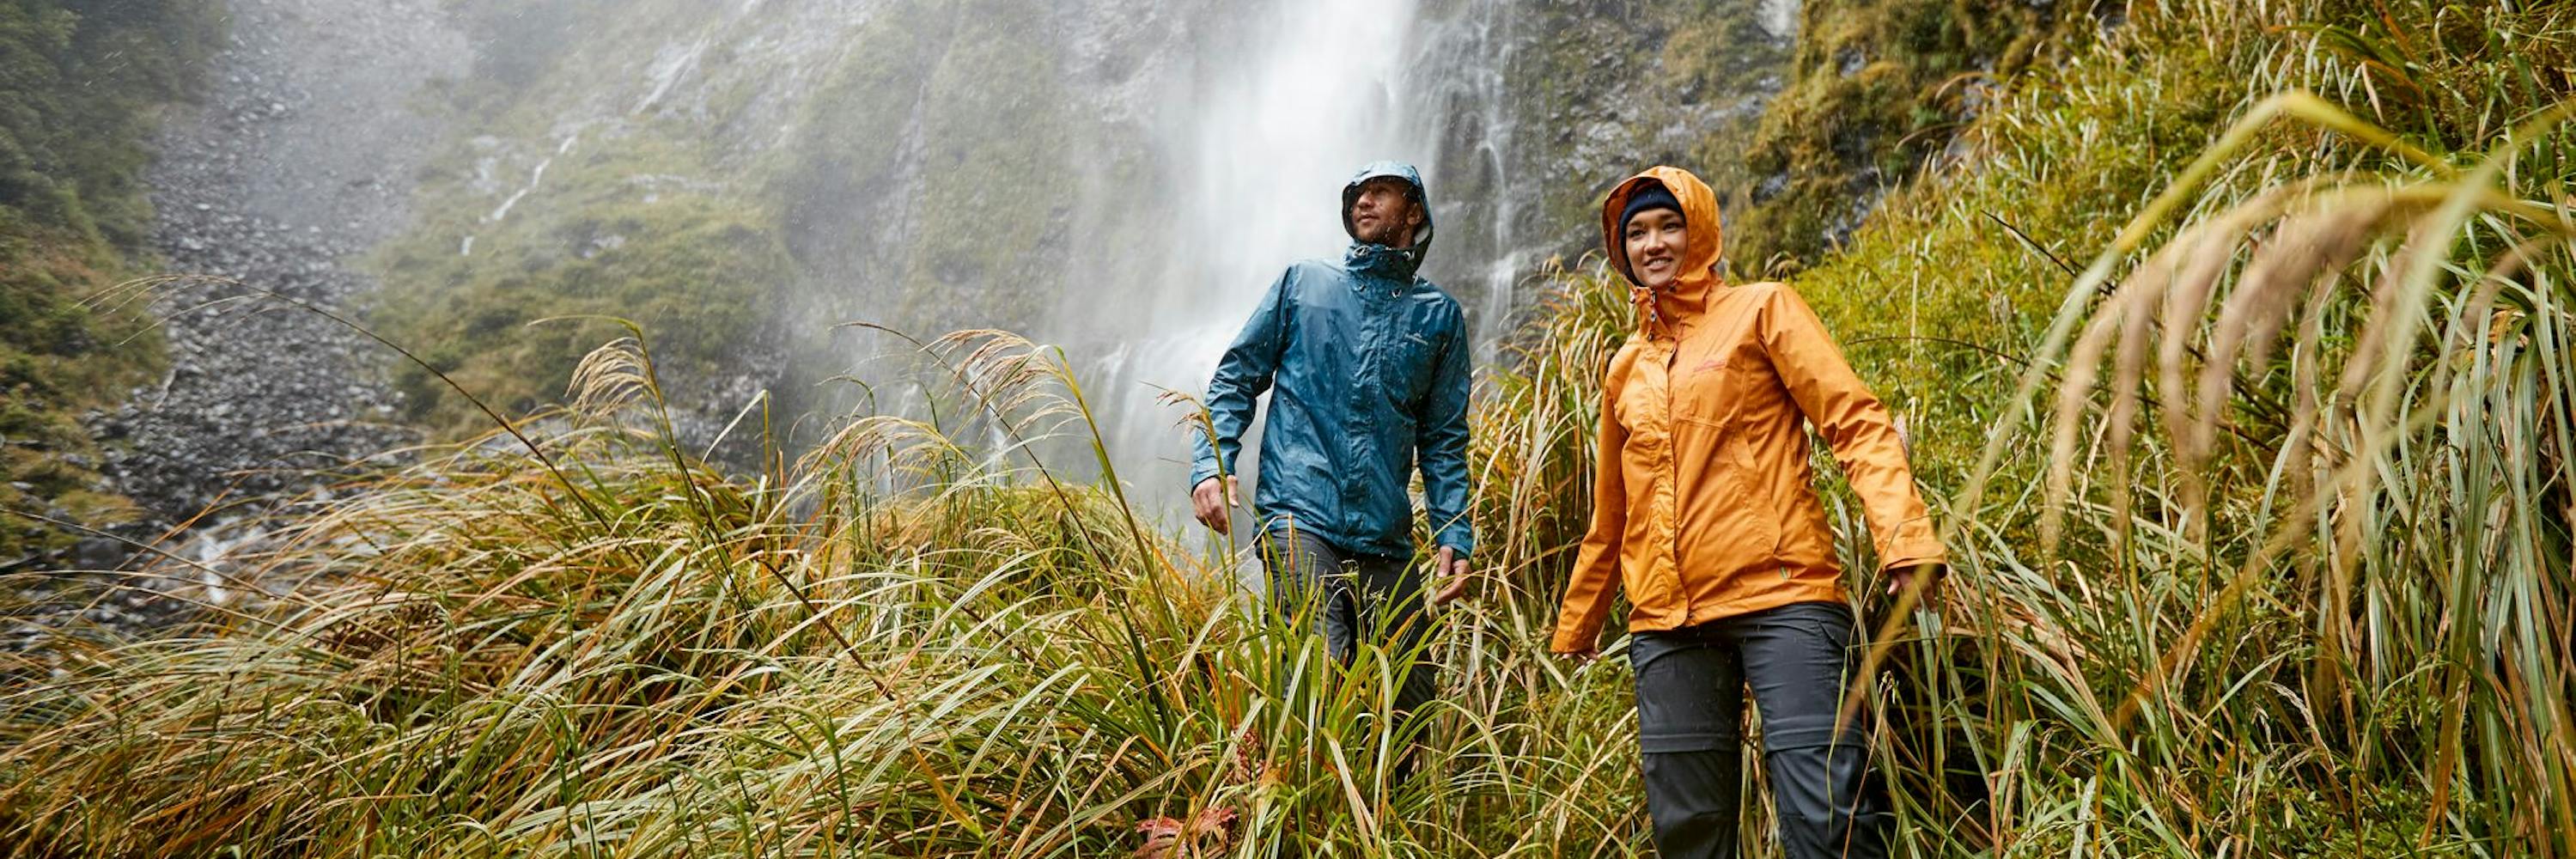 8 Tips For Hiking In Wet Weather & Rain